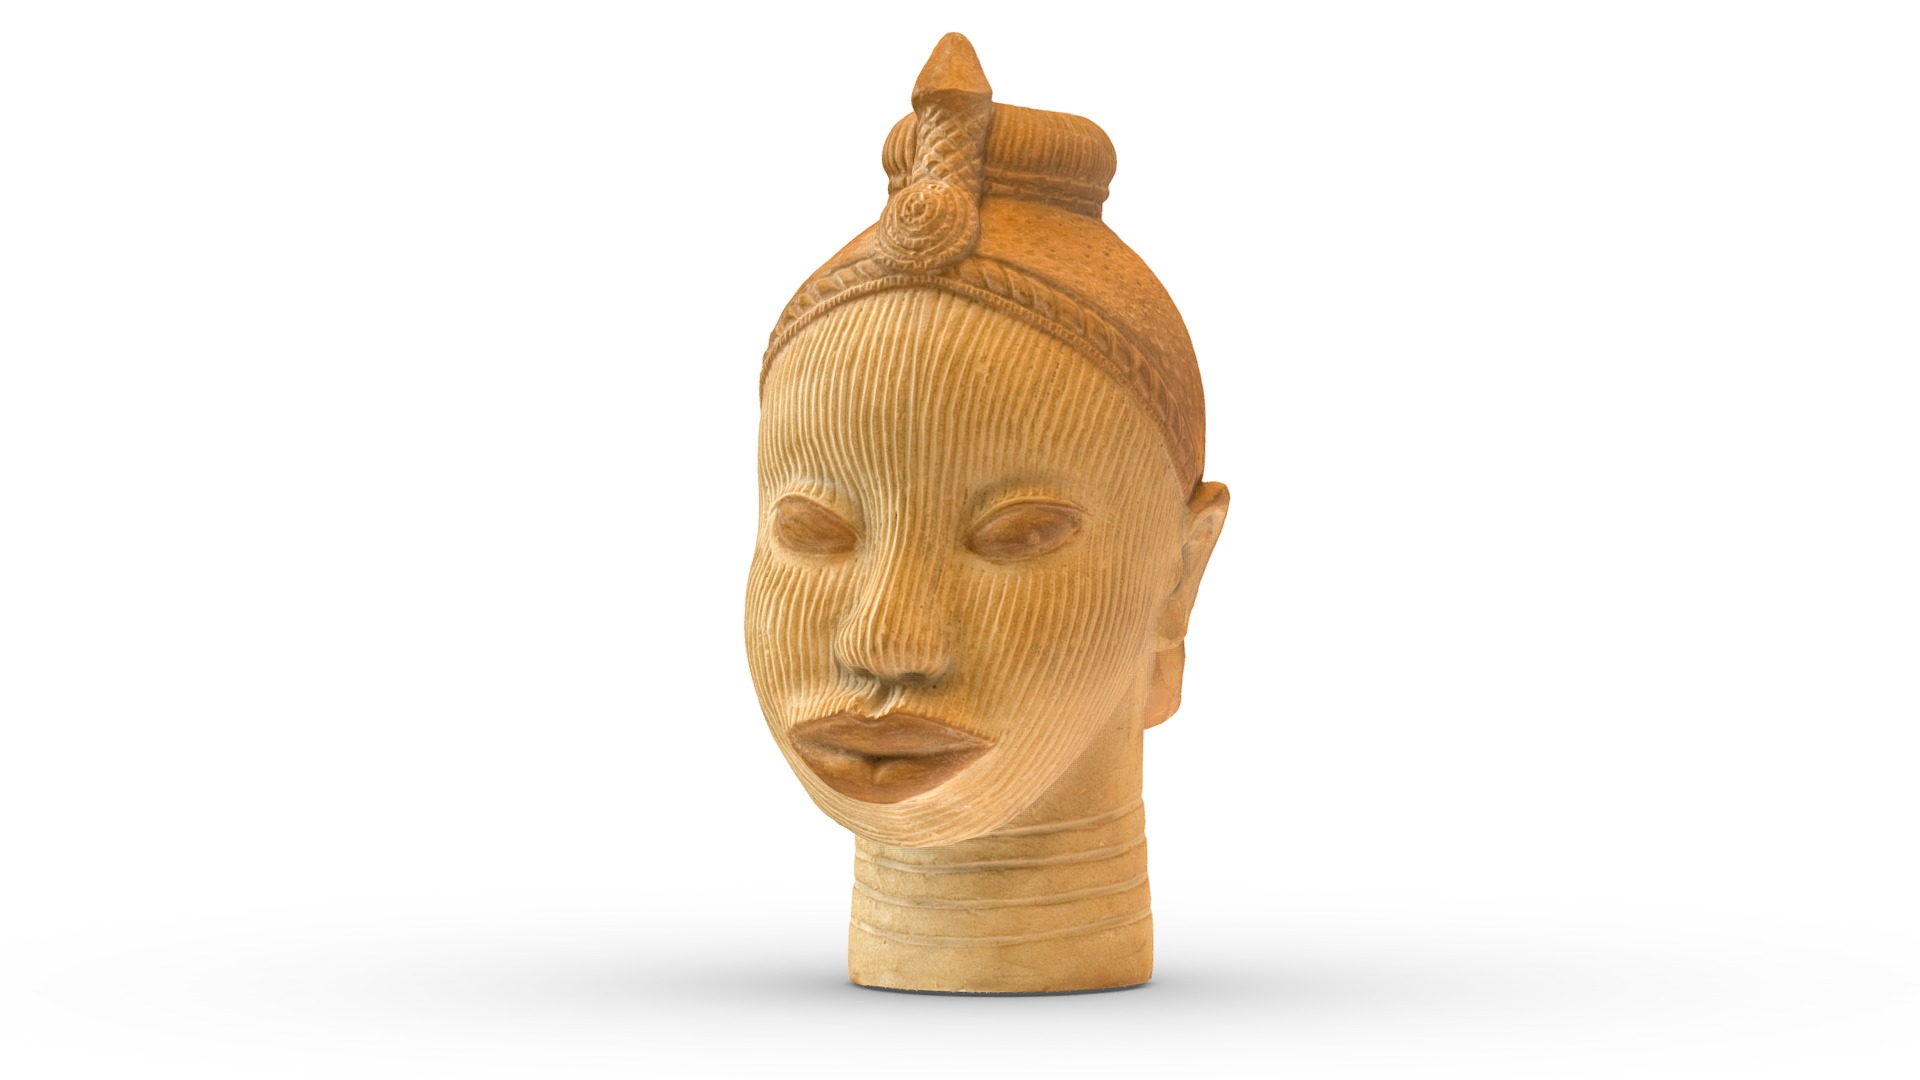 3D model Ceramic head from Nigeria - This is a 3D model of the Ceramic head from Nigeria. The 3D model is about a wooden head of a person.